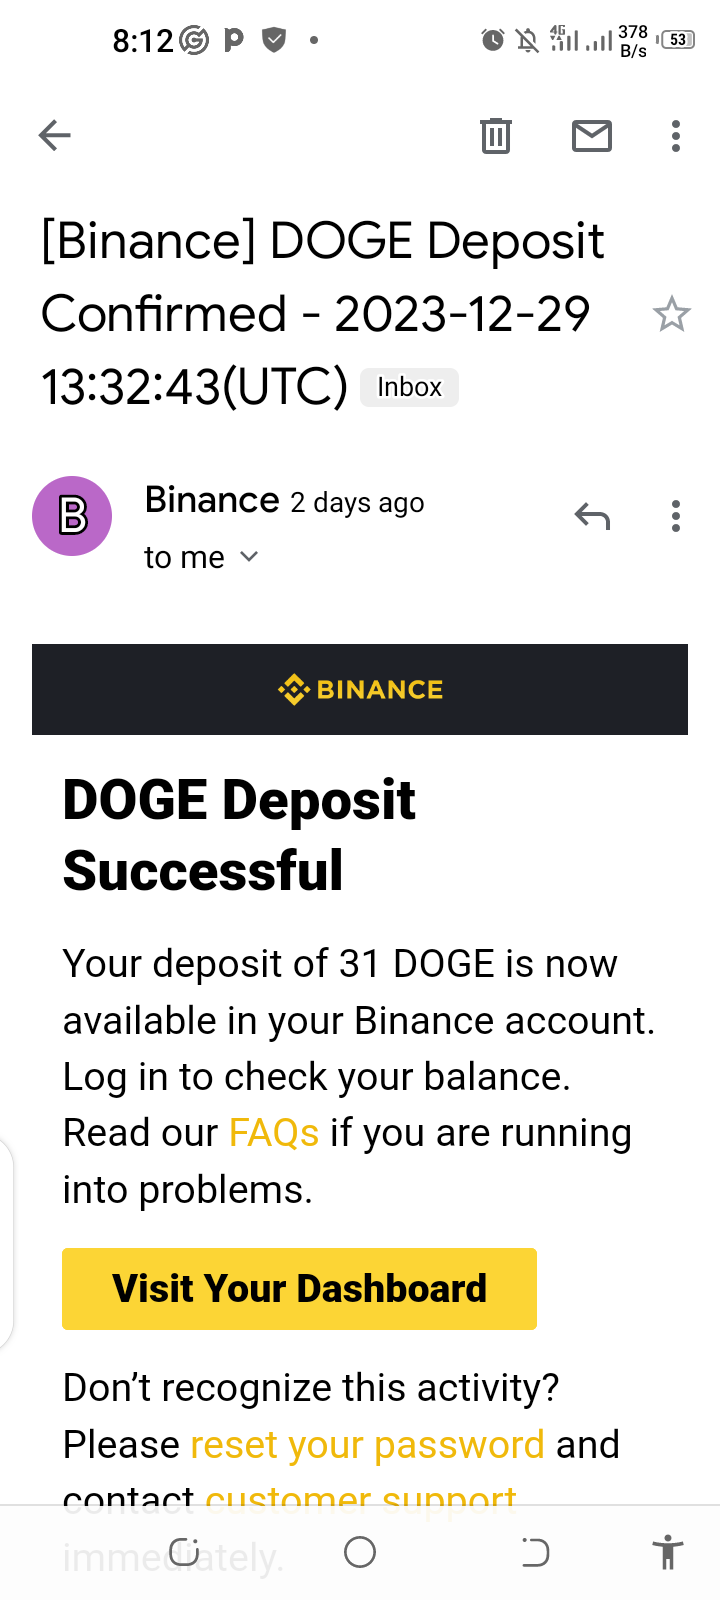 Another payment received from this site.